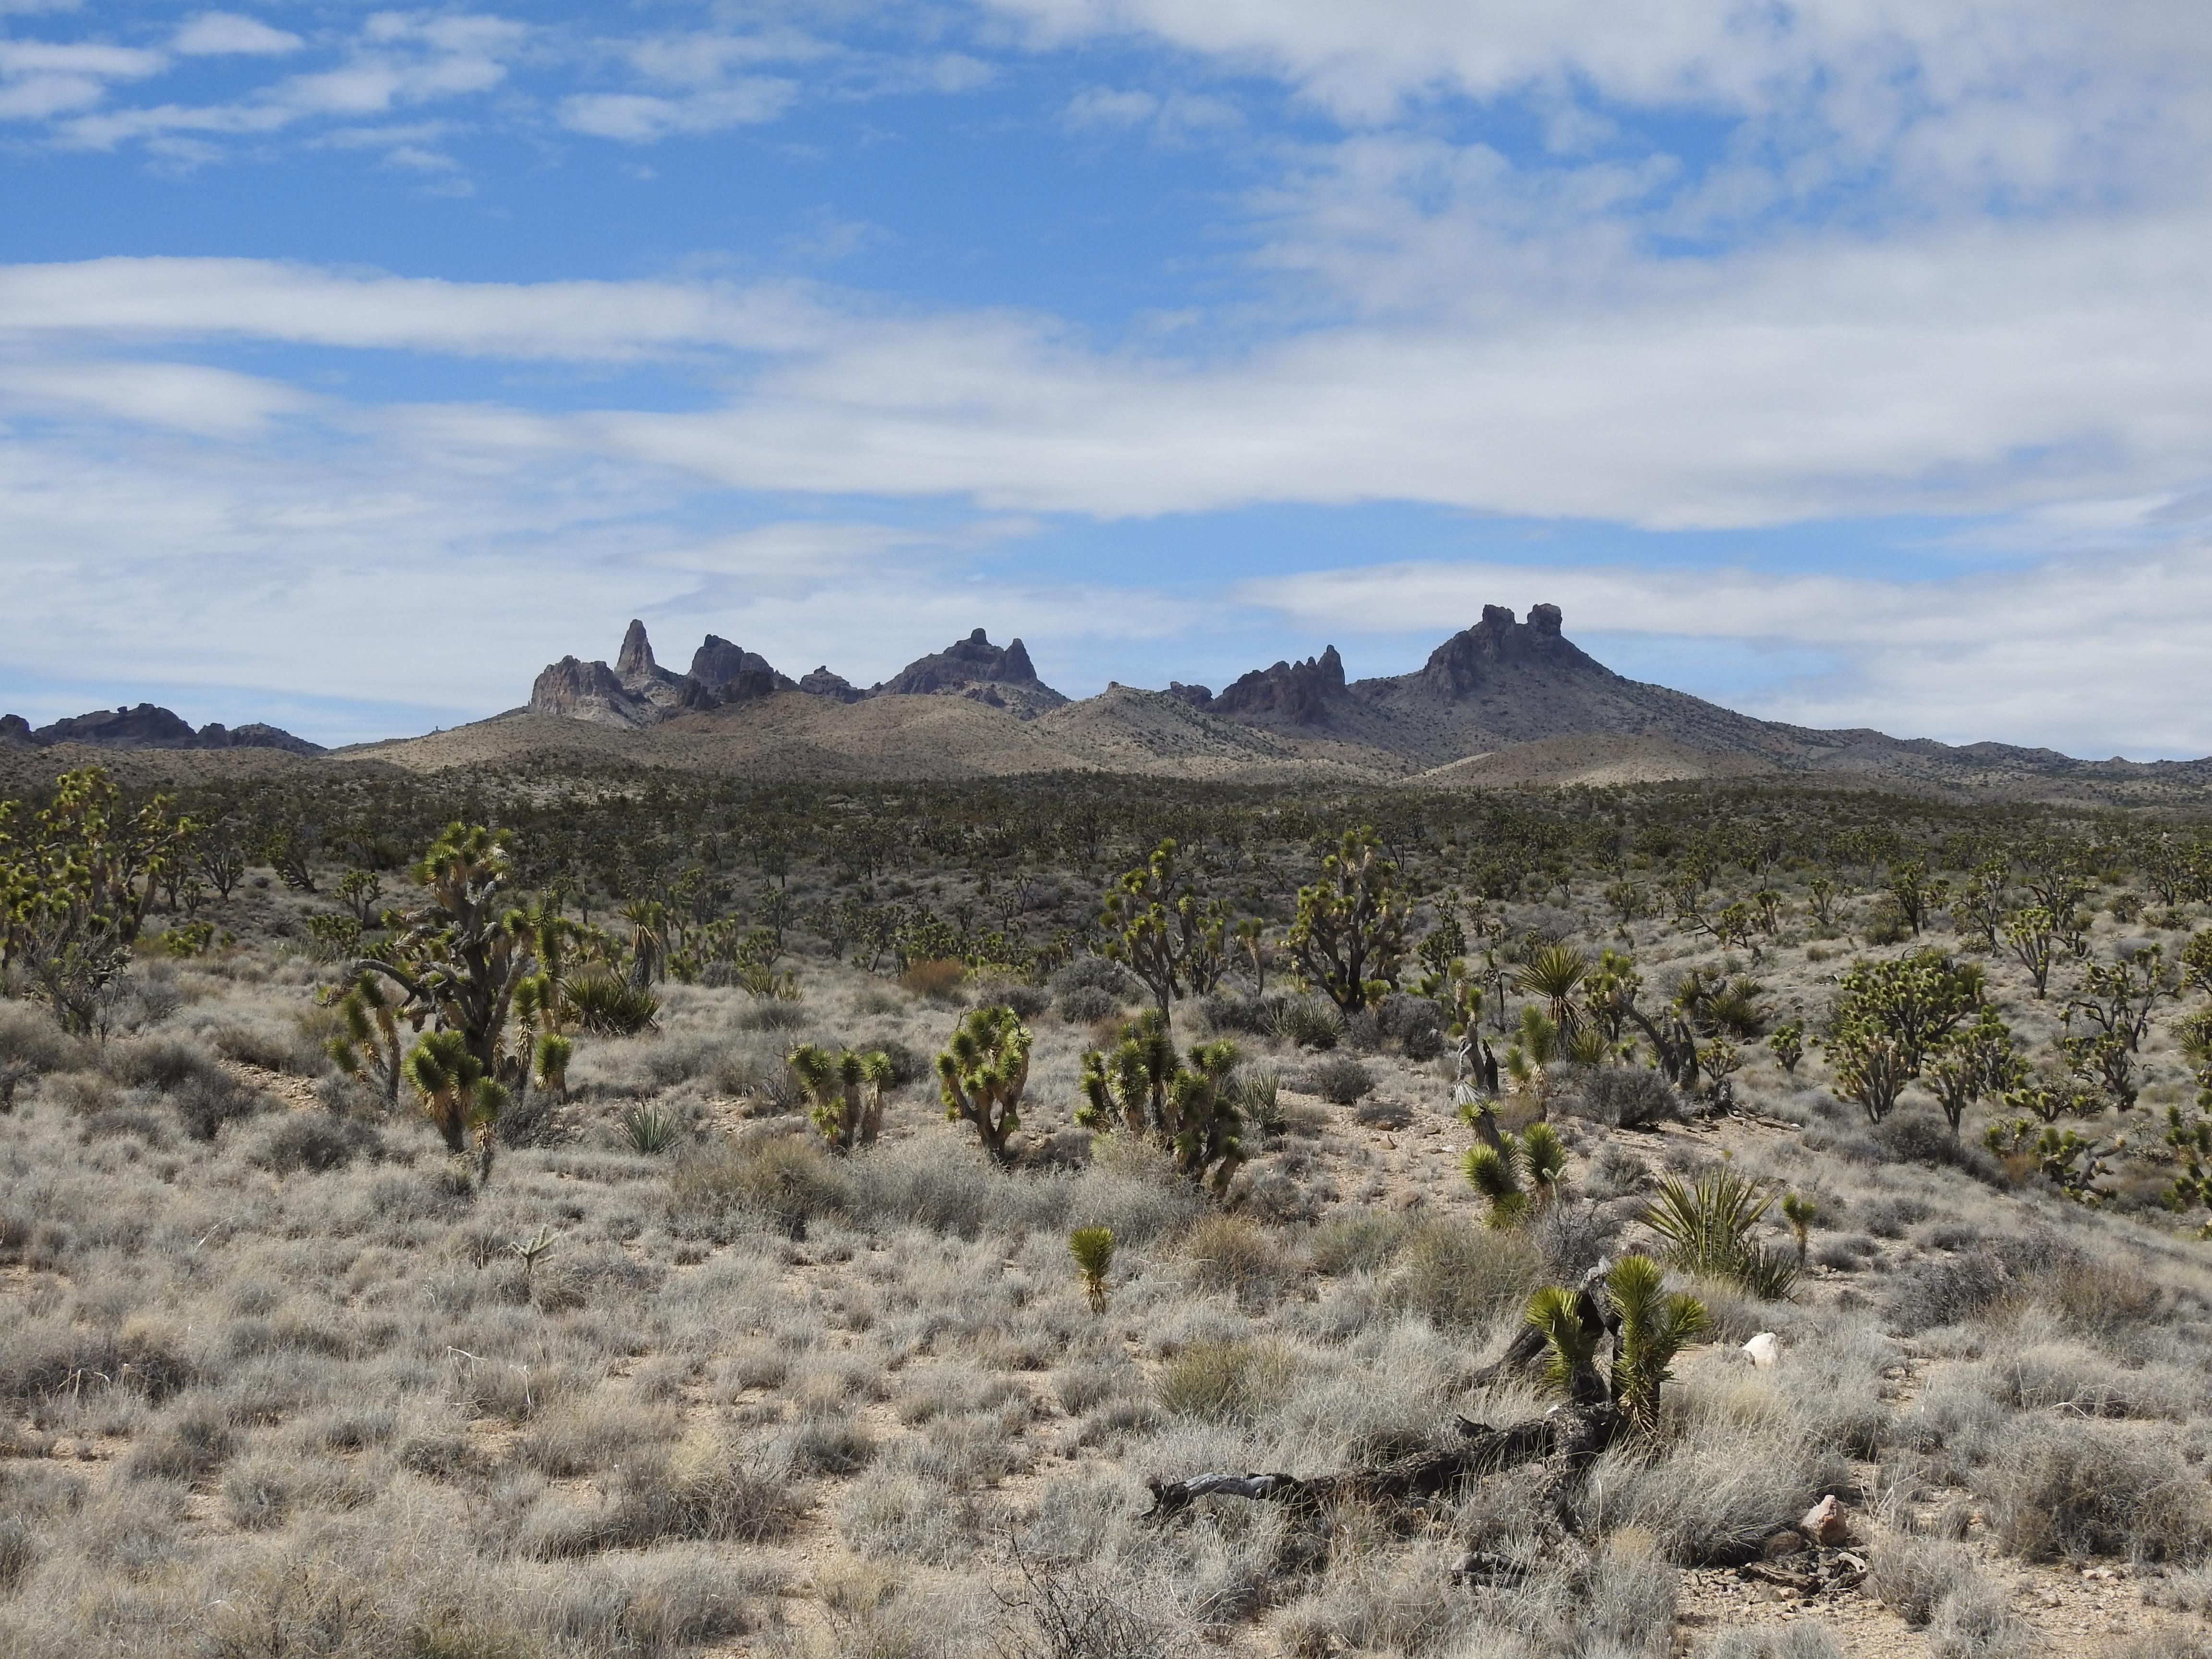 Foreground is desert greenery. The isolated spires of the Castle Peaks rise up in the background